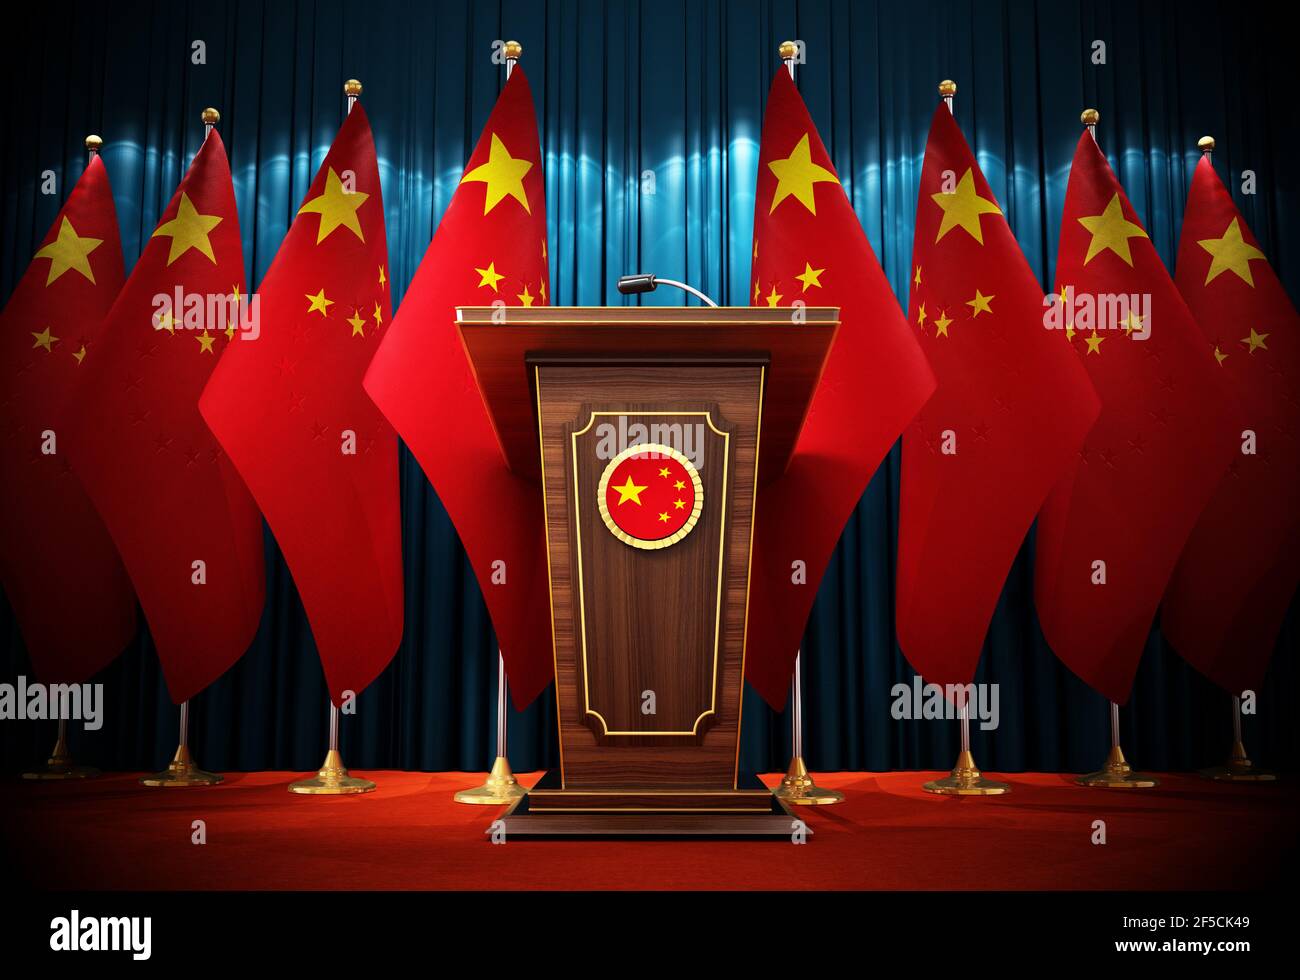 Group of Chinese flags standing next to lectern in the conference hall. 3D illustration. Stock Photo